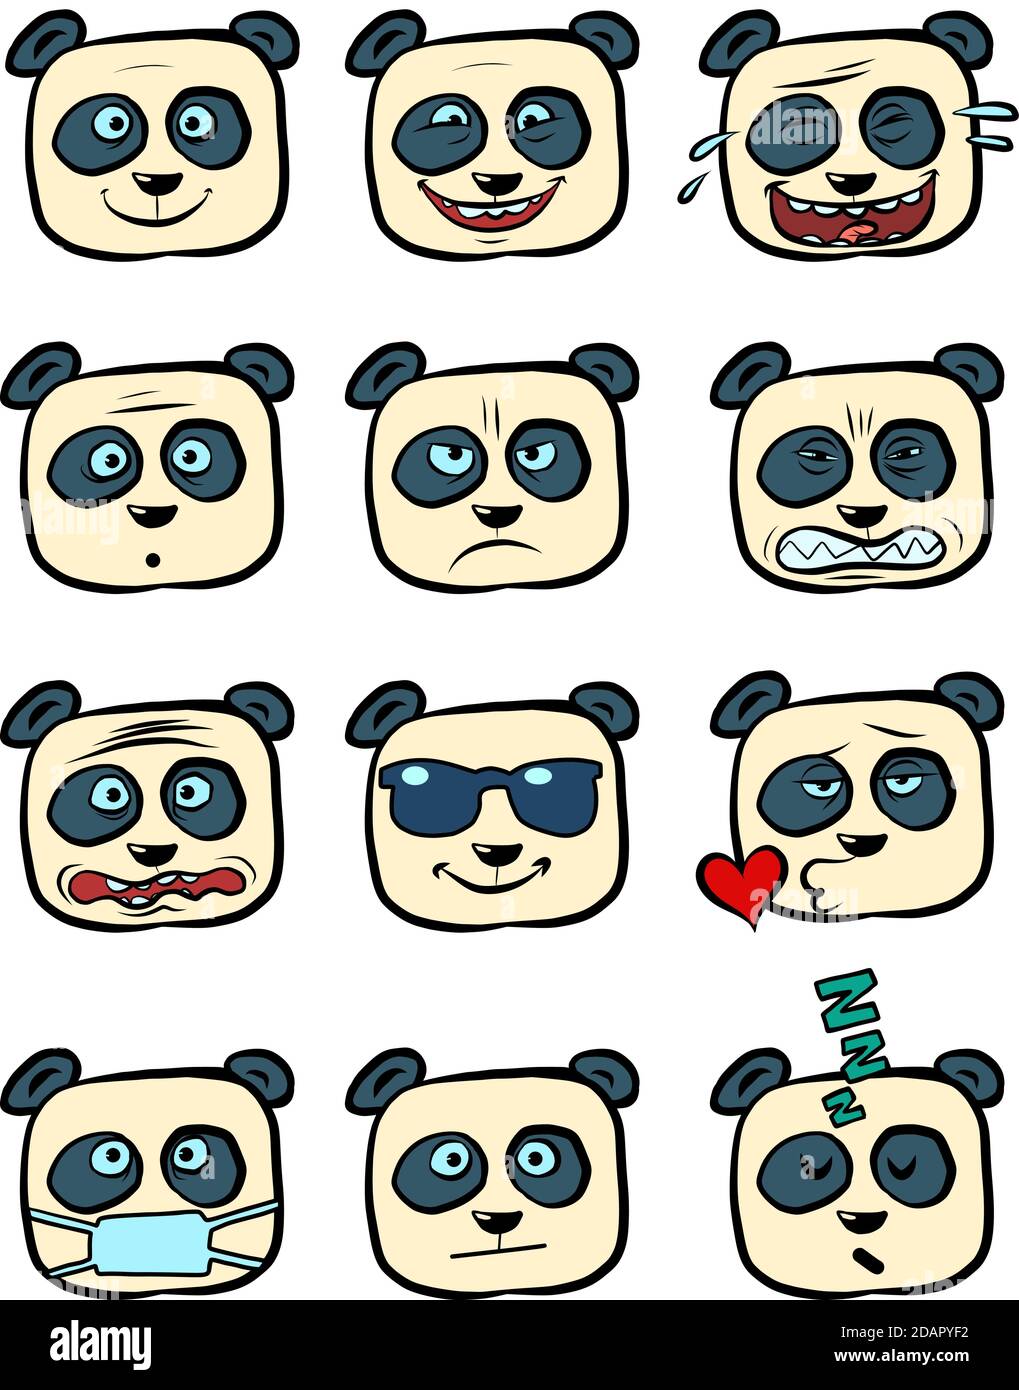 Panda Emoji faces with different emotions collection set character, cute animal Stock Vector